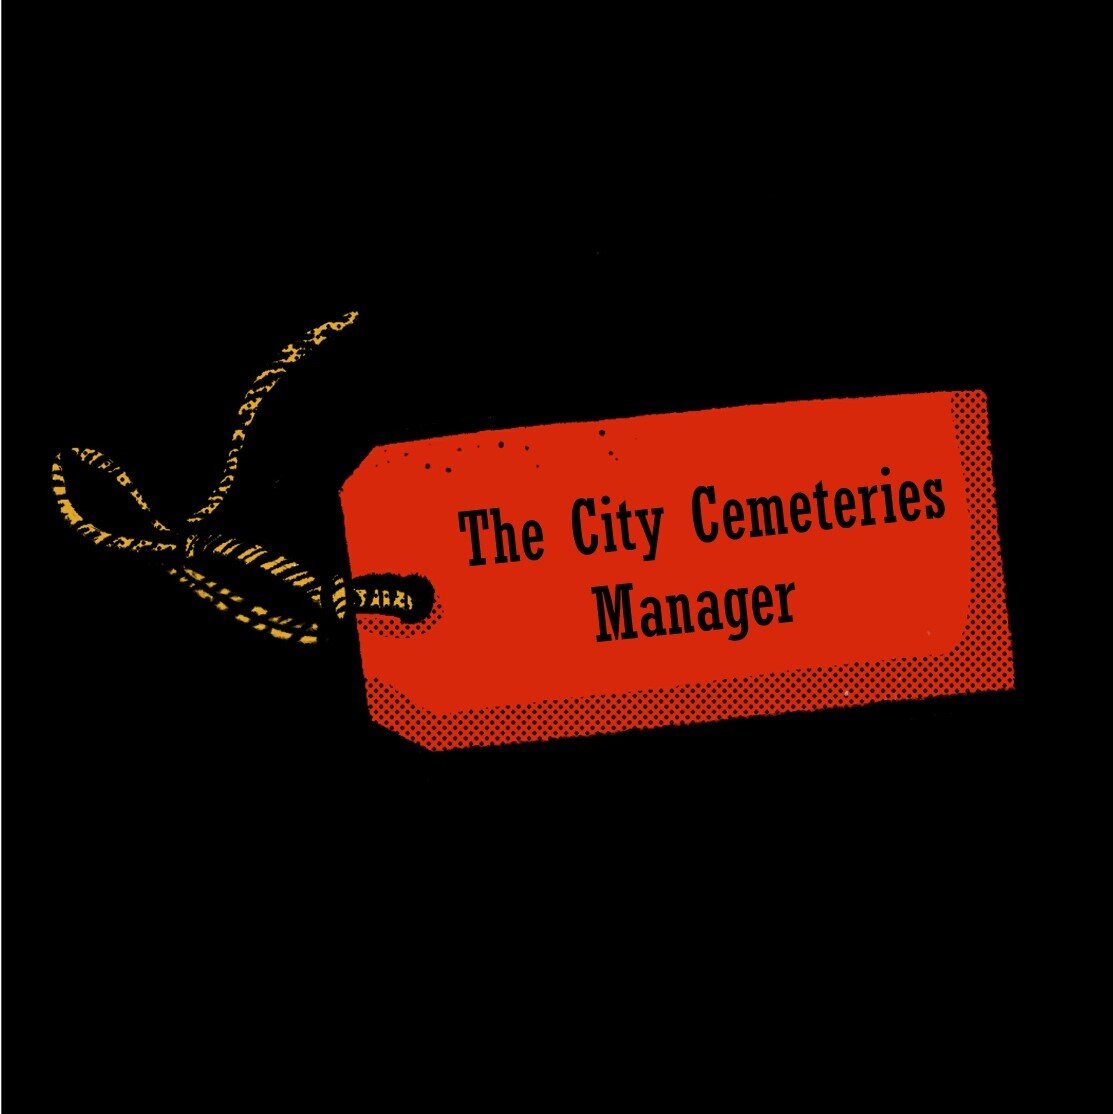 Episode 2: The City Cemeteries Manager